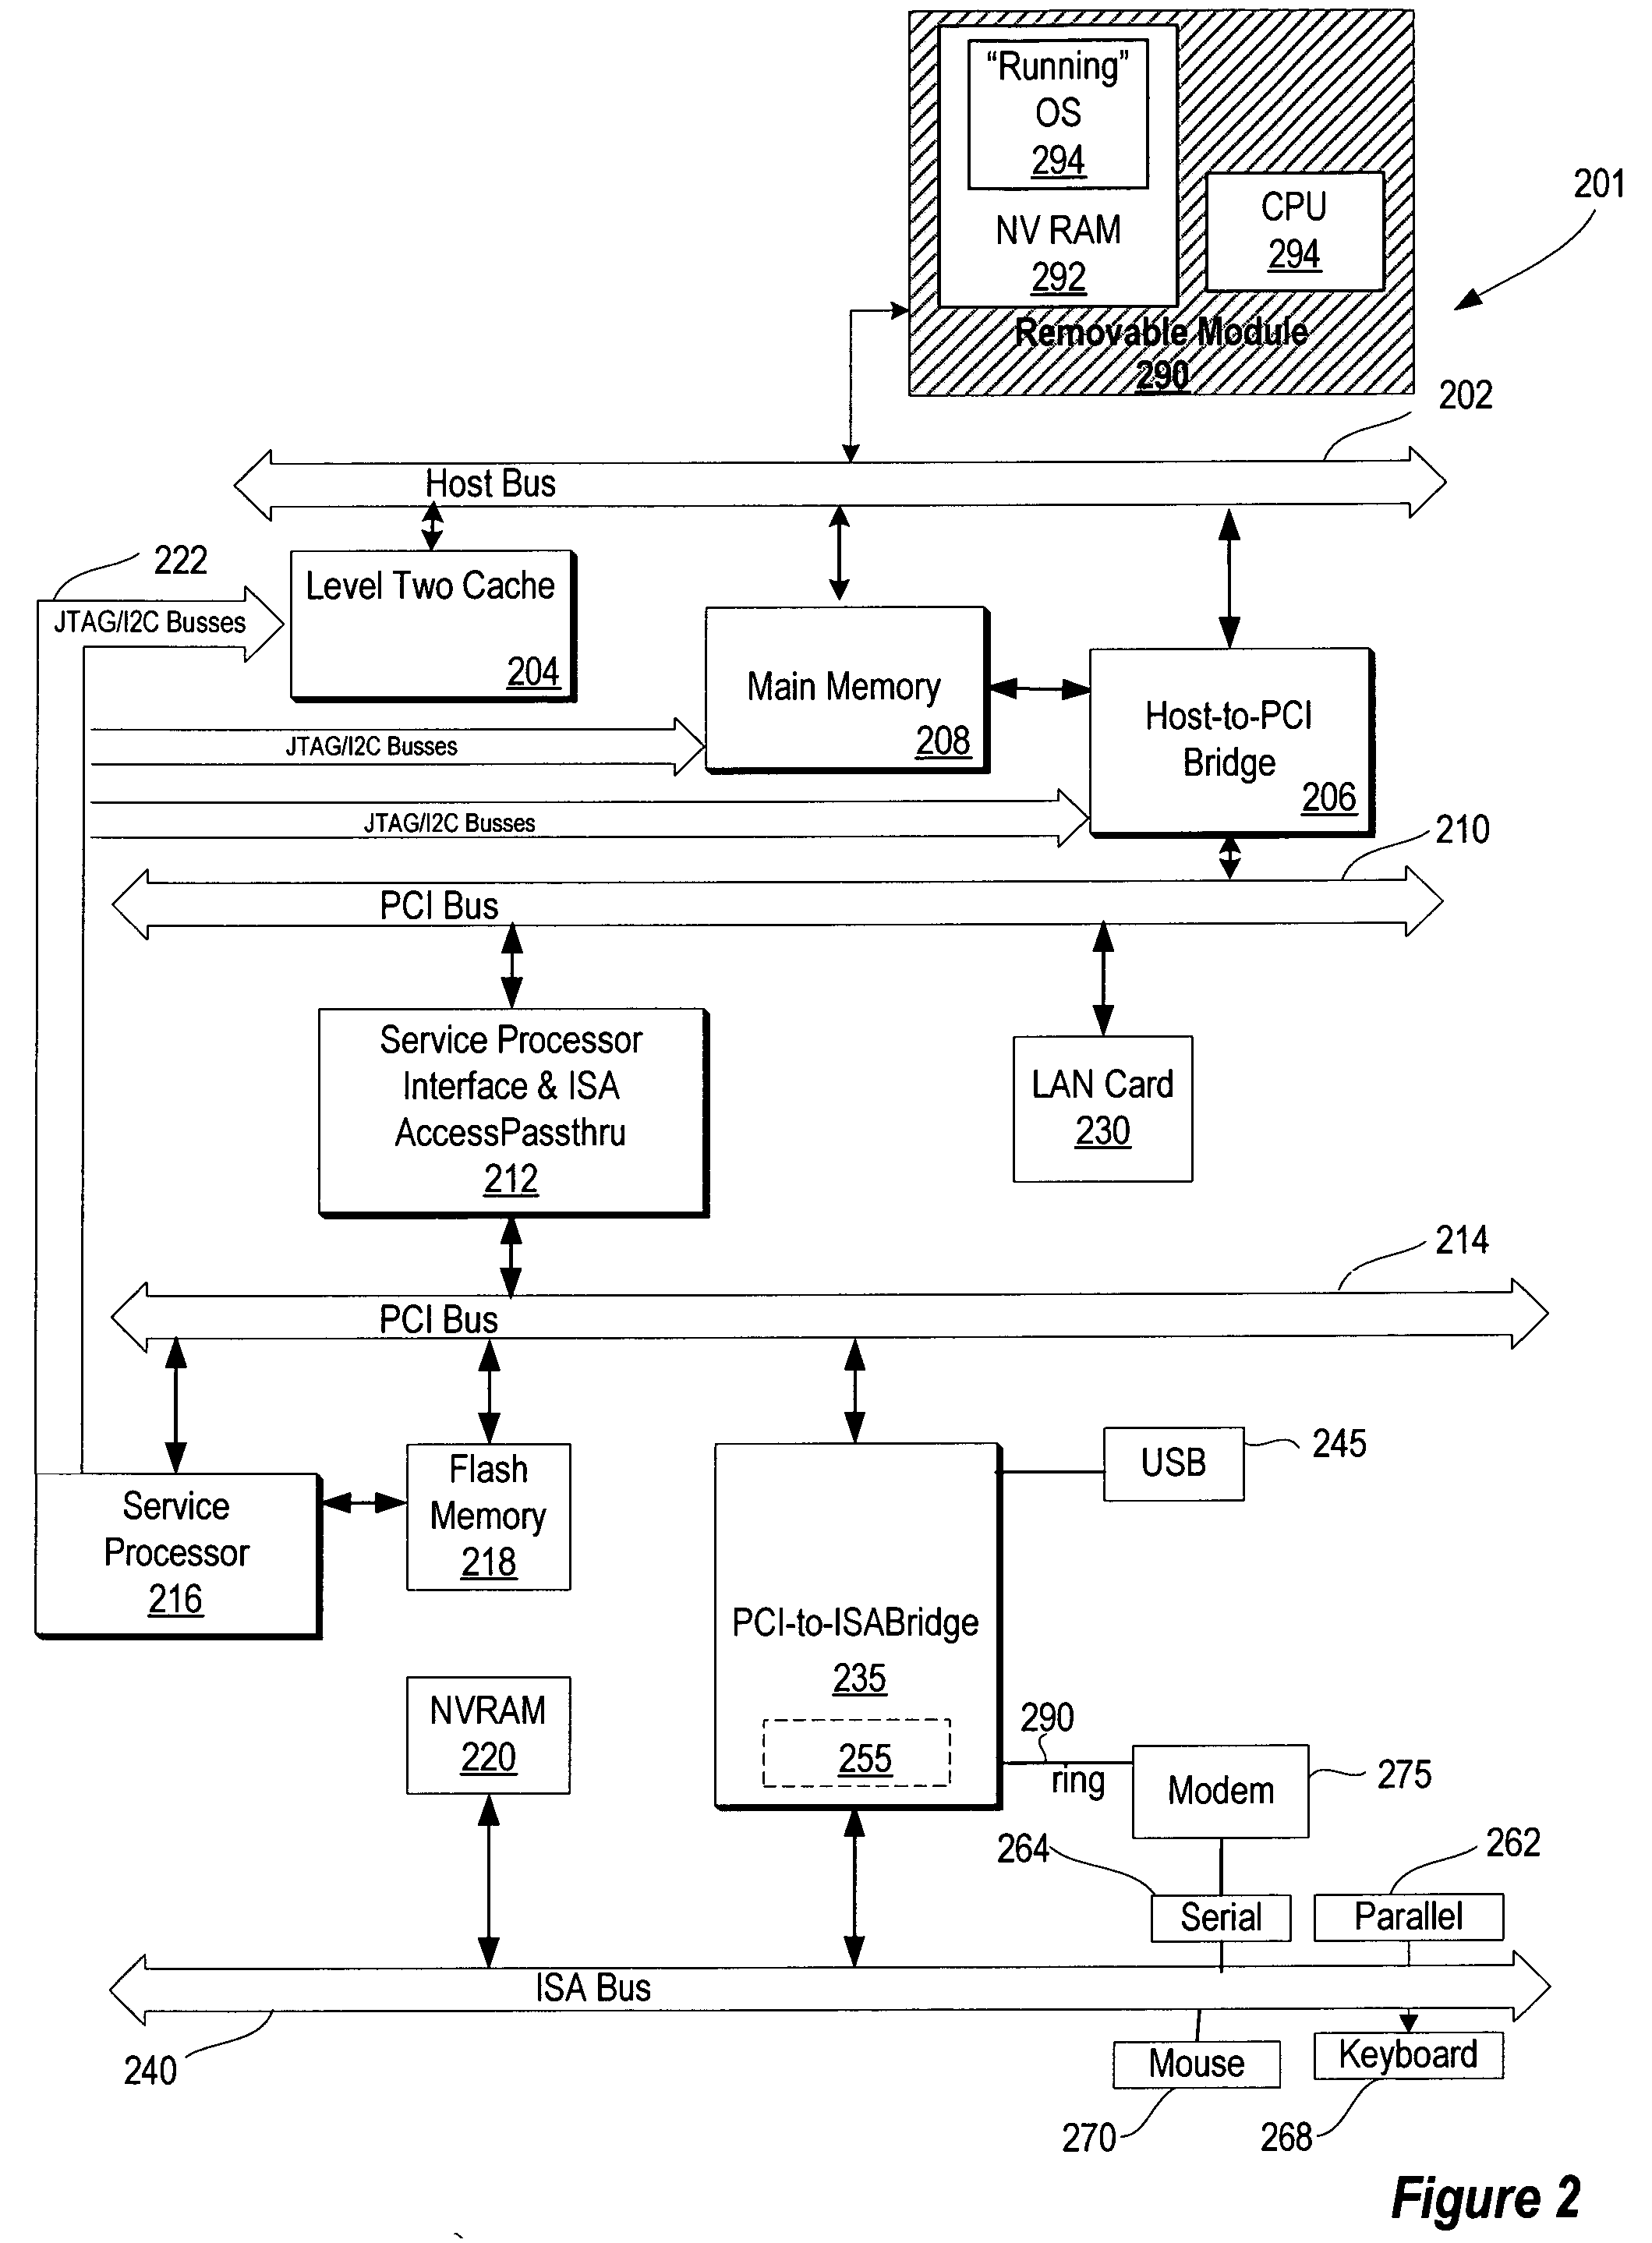 System and method for manufacturing and updating insertable portable operating system module